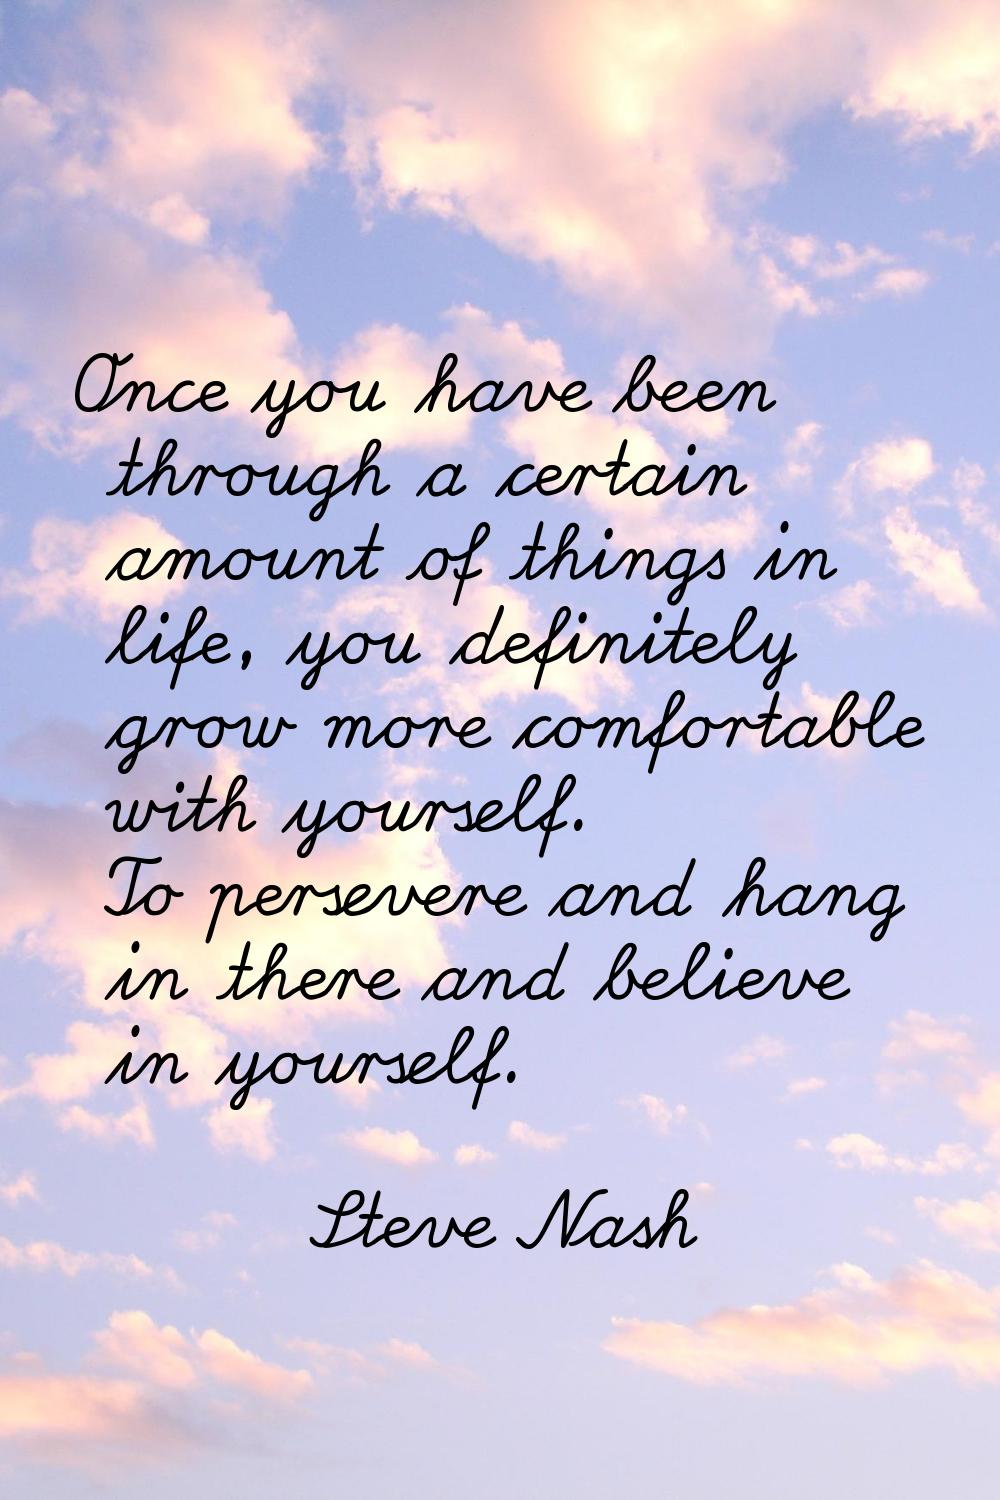 Once you have been through a certain amount of things in life, you definitely grow more comfortable